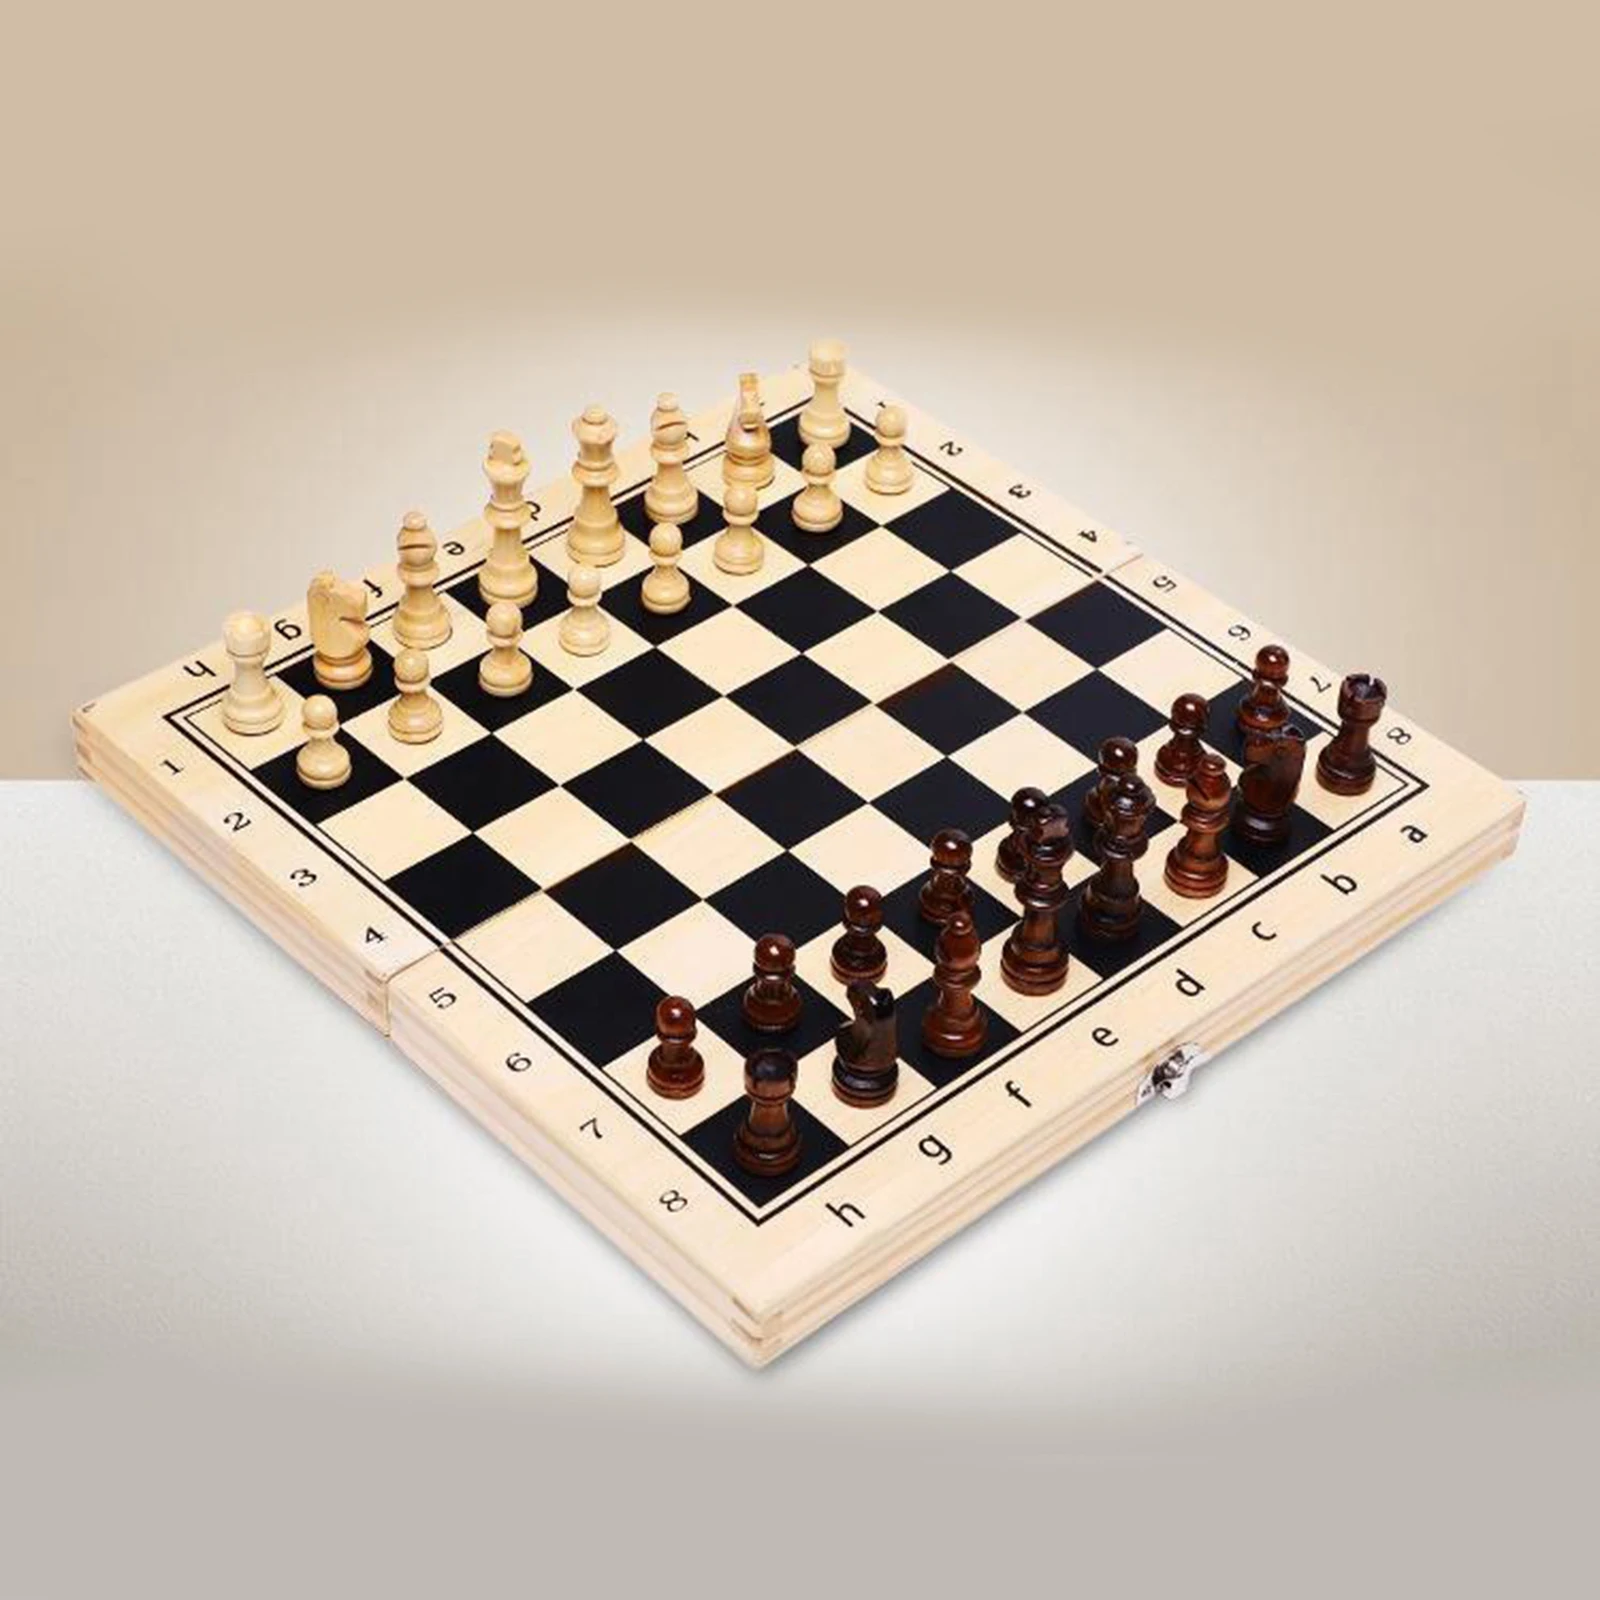 Wooden Folding Magnetic Chess Board Set 29x29cm Interior Storage Family Game handmade antique style